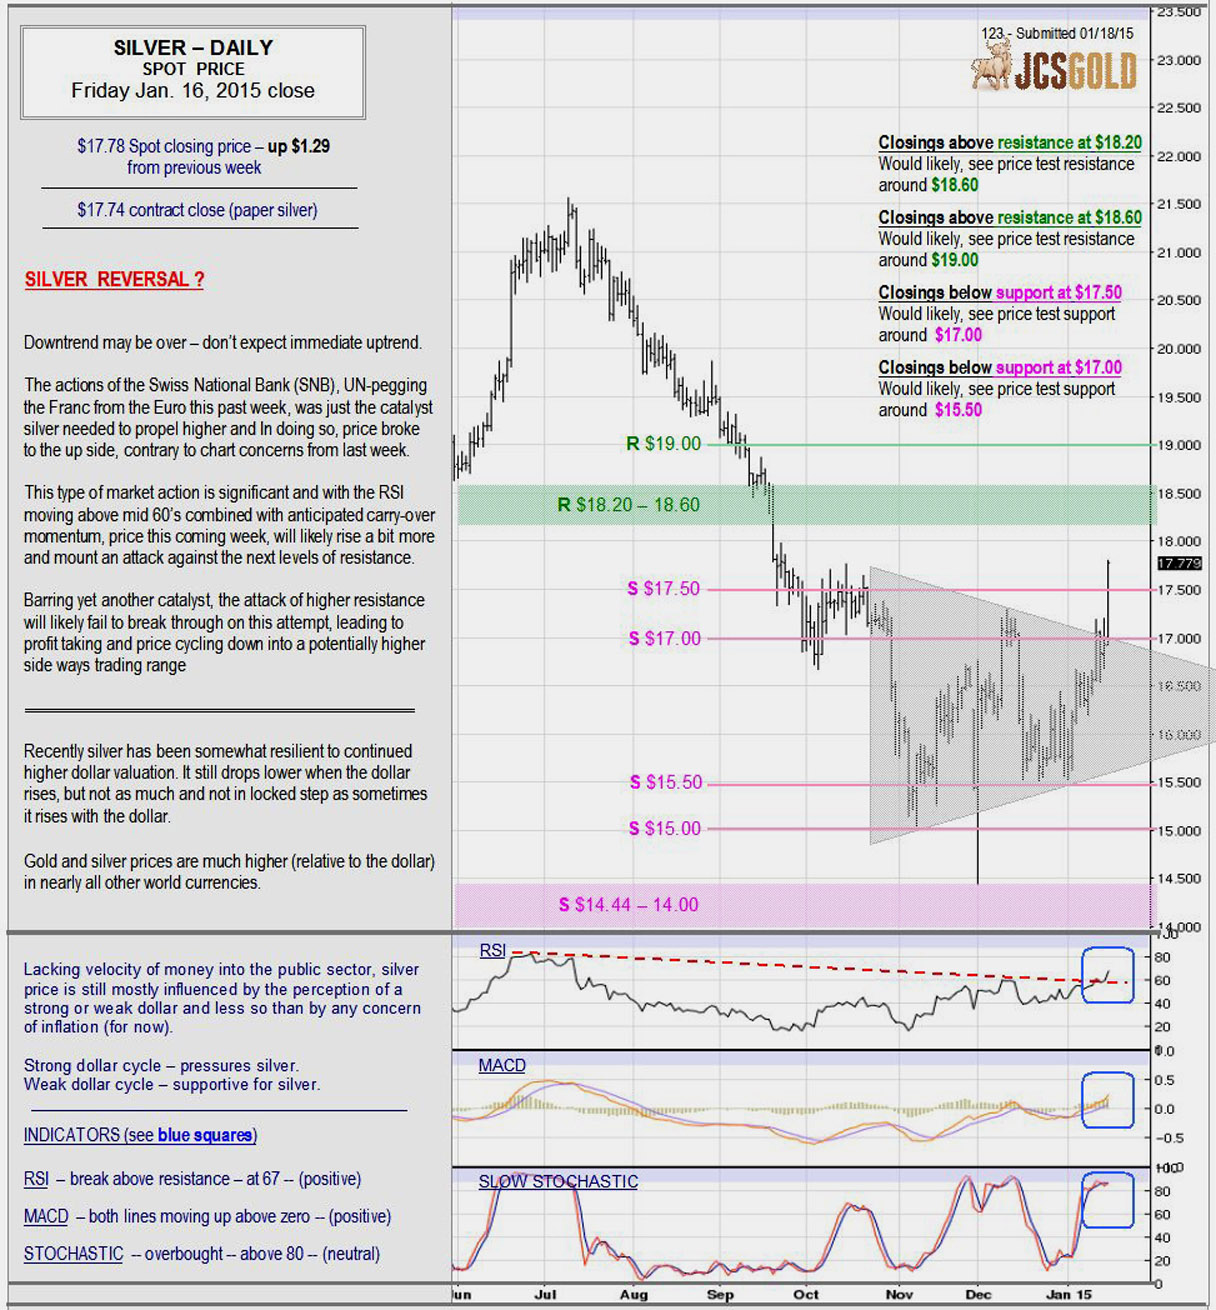 Jan 16, 2015 chart & commentary